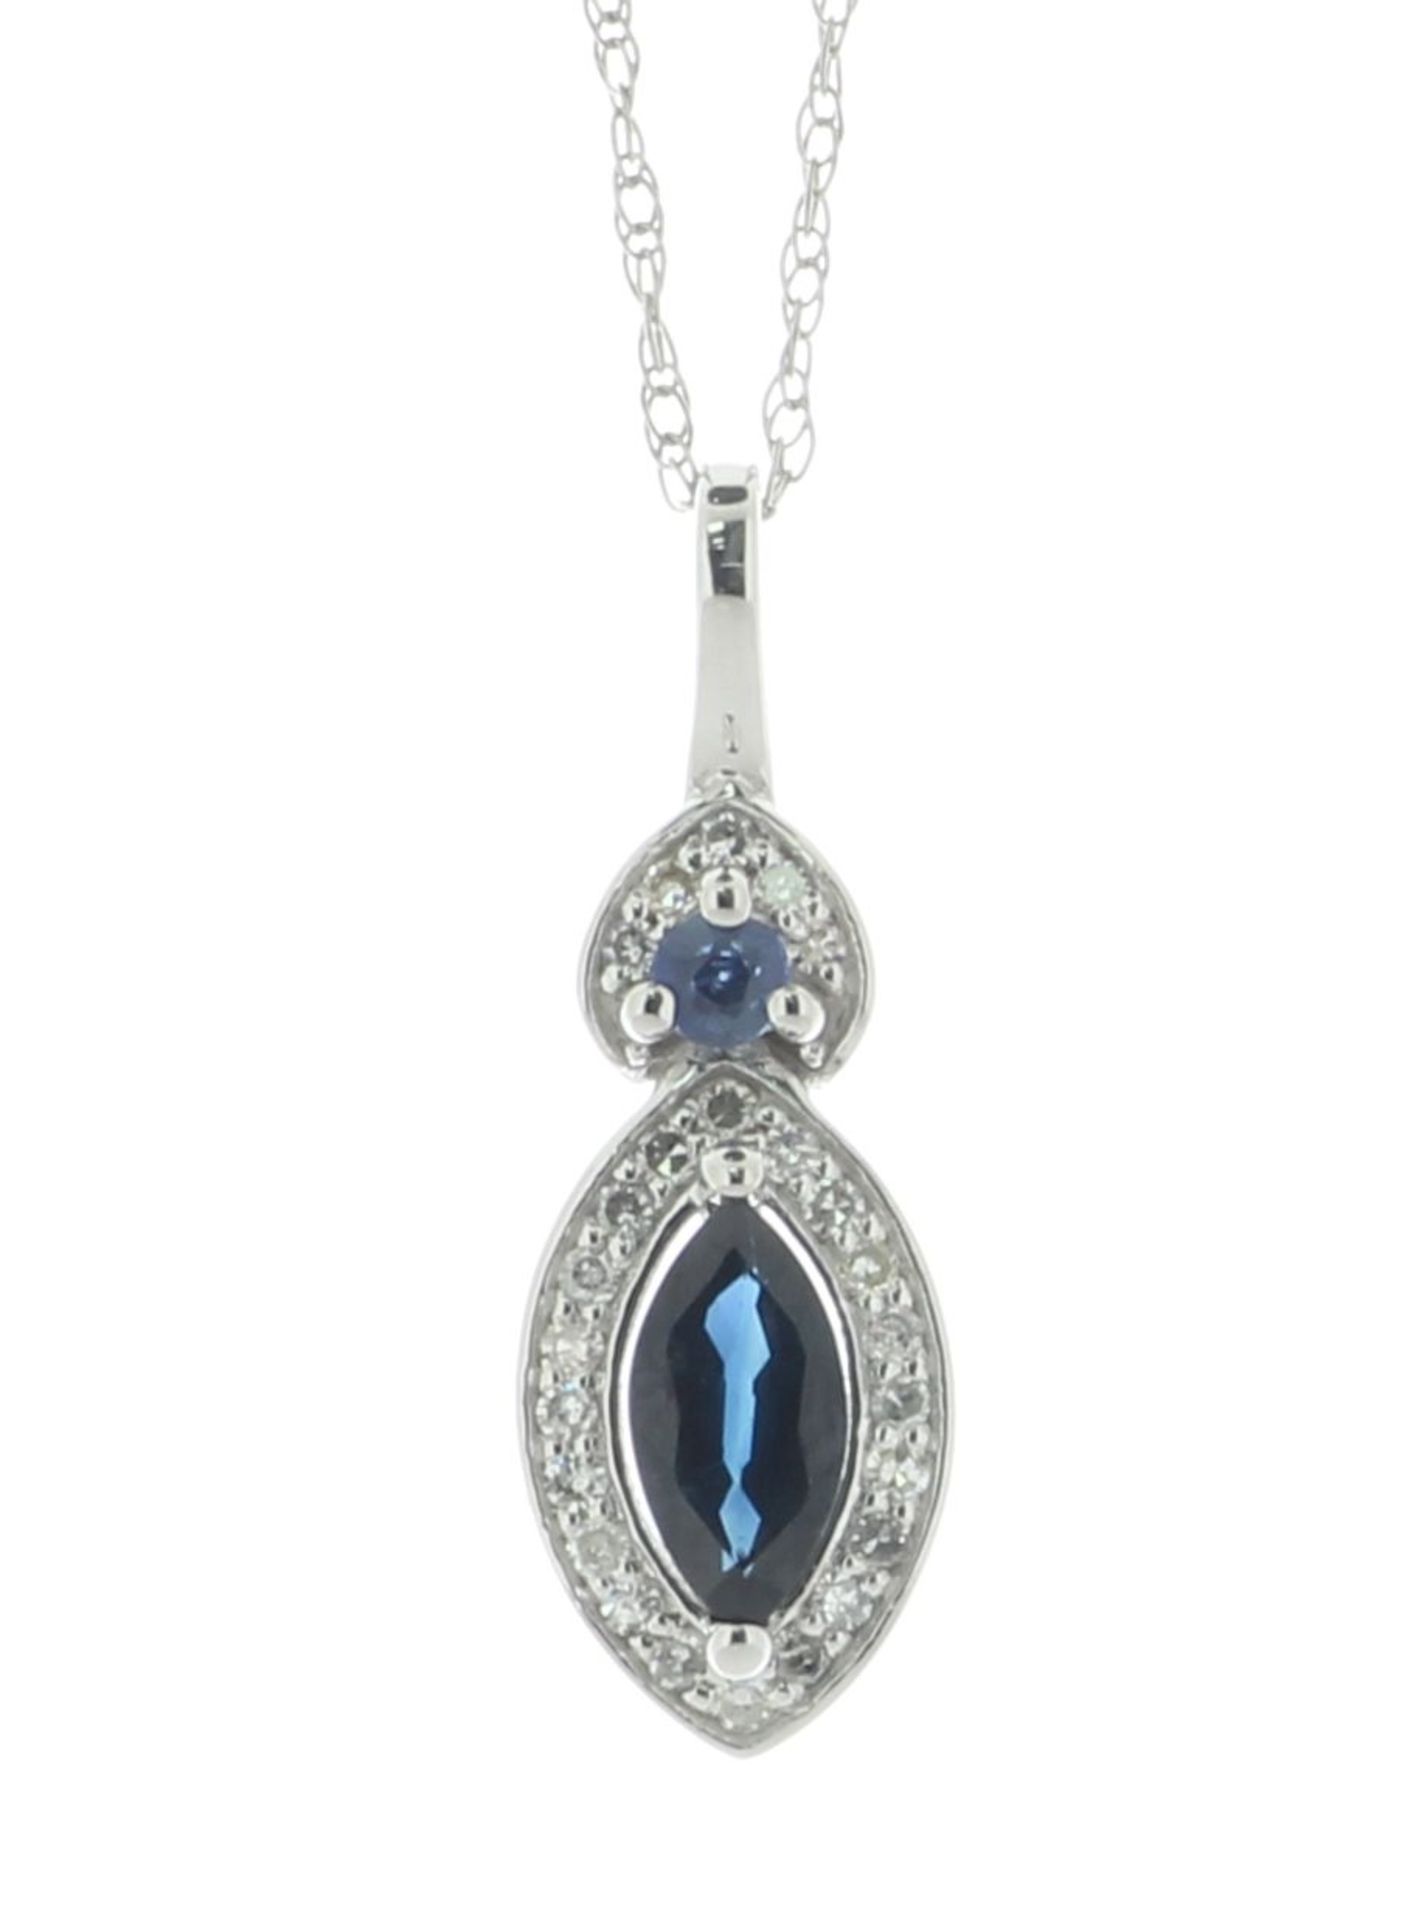 14ct White Gold Marquise Cluster Diamond And Sapphire Pendant And Chain 0.08 Carats - Valued By